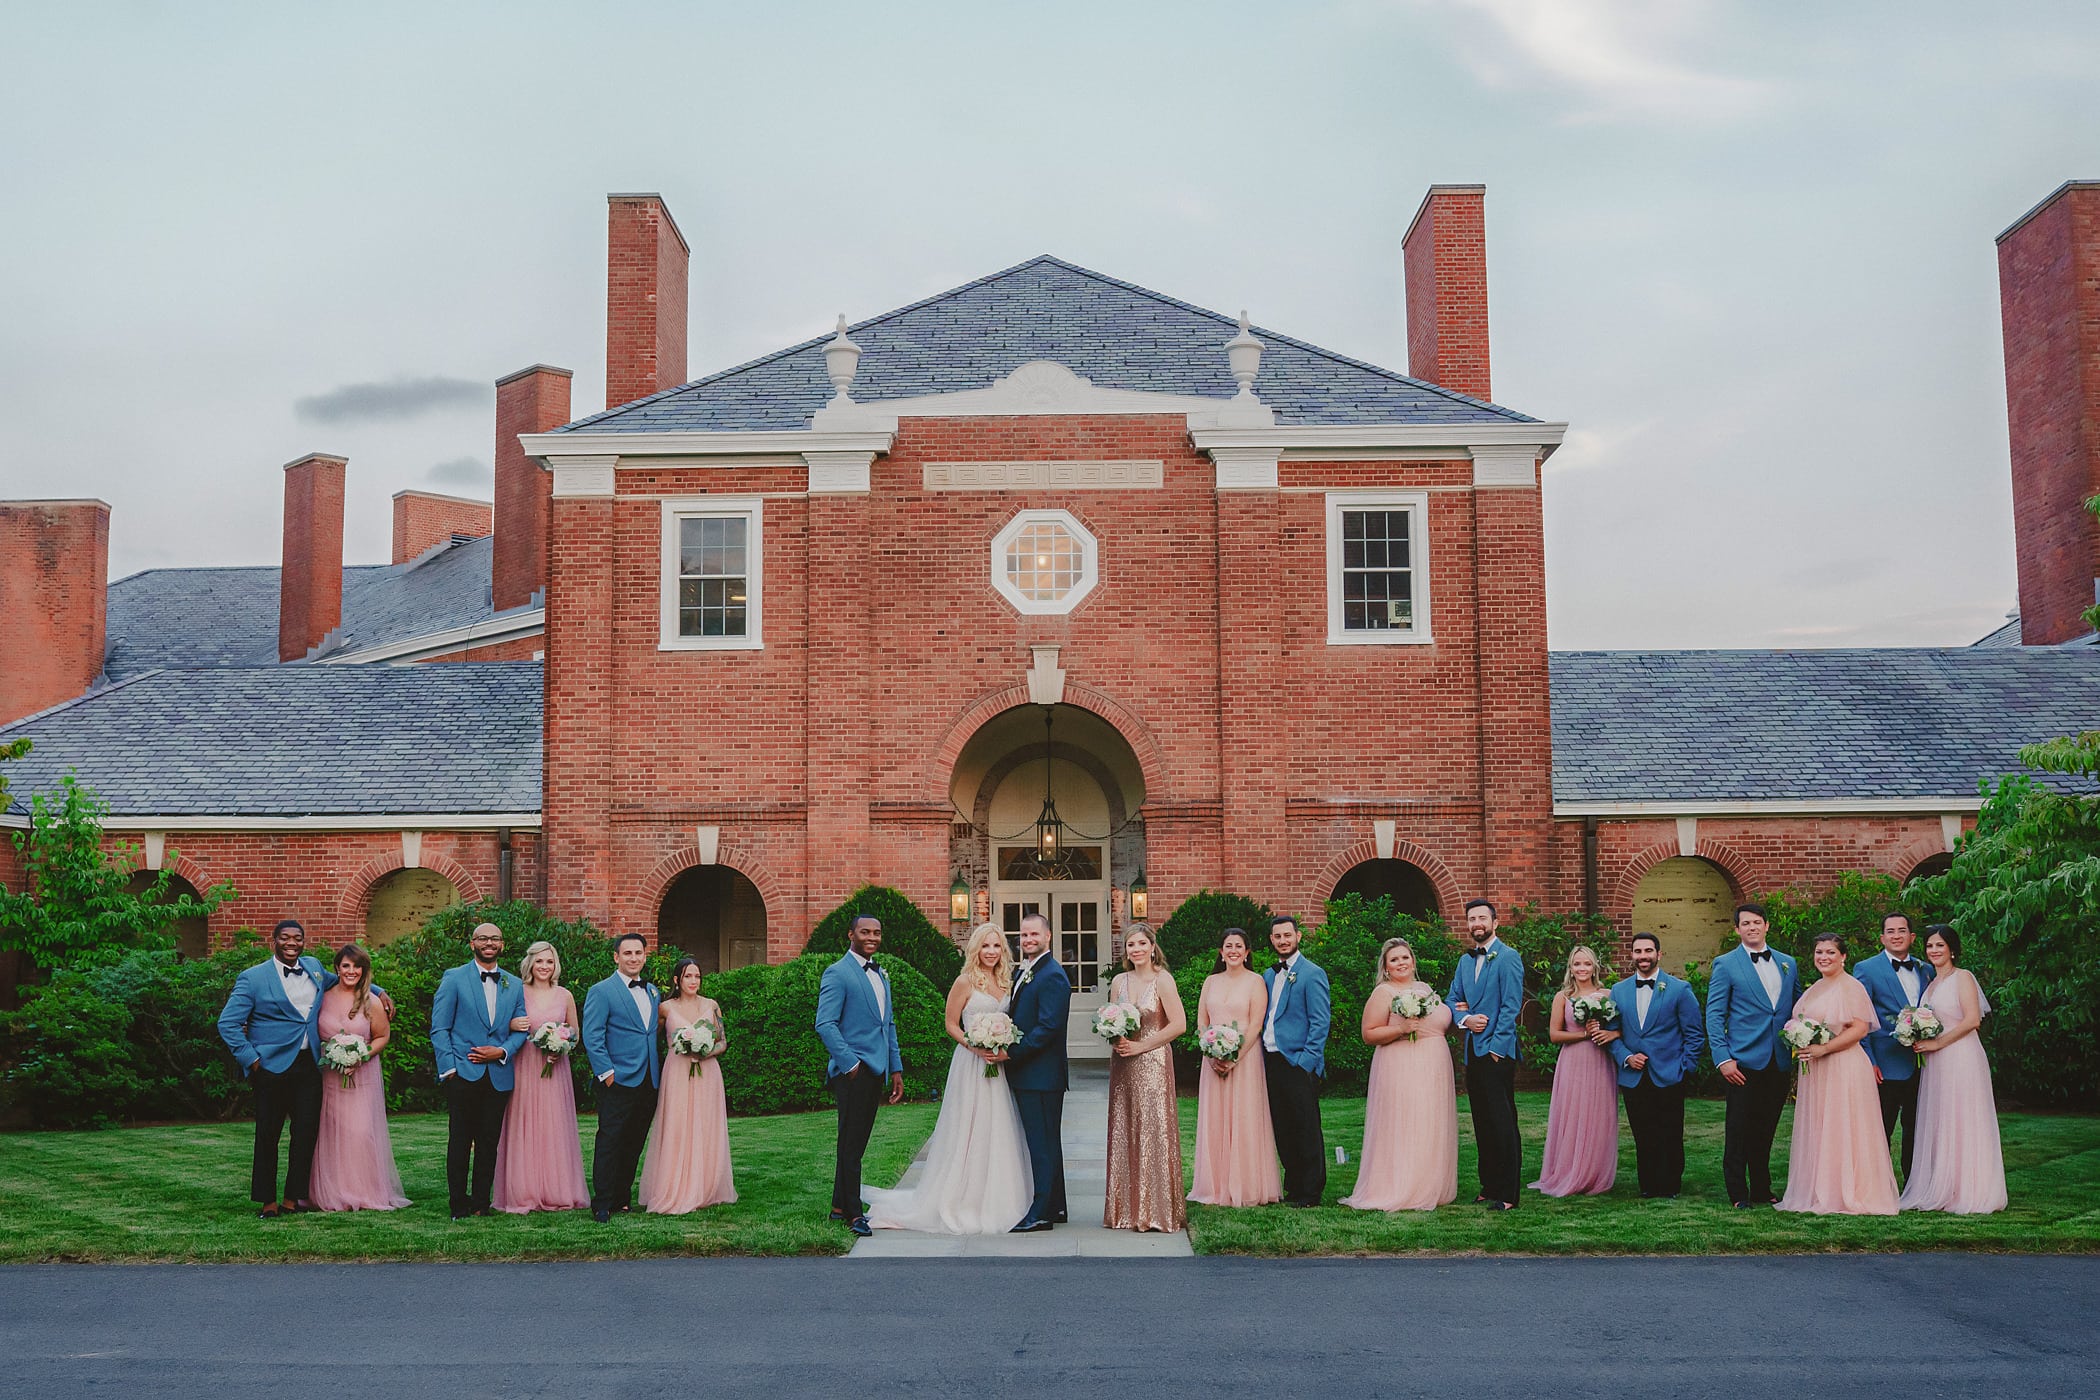 Photo of a large bridal party where bride's maids are wearing pink dresses and groomsman blue suits